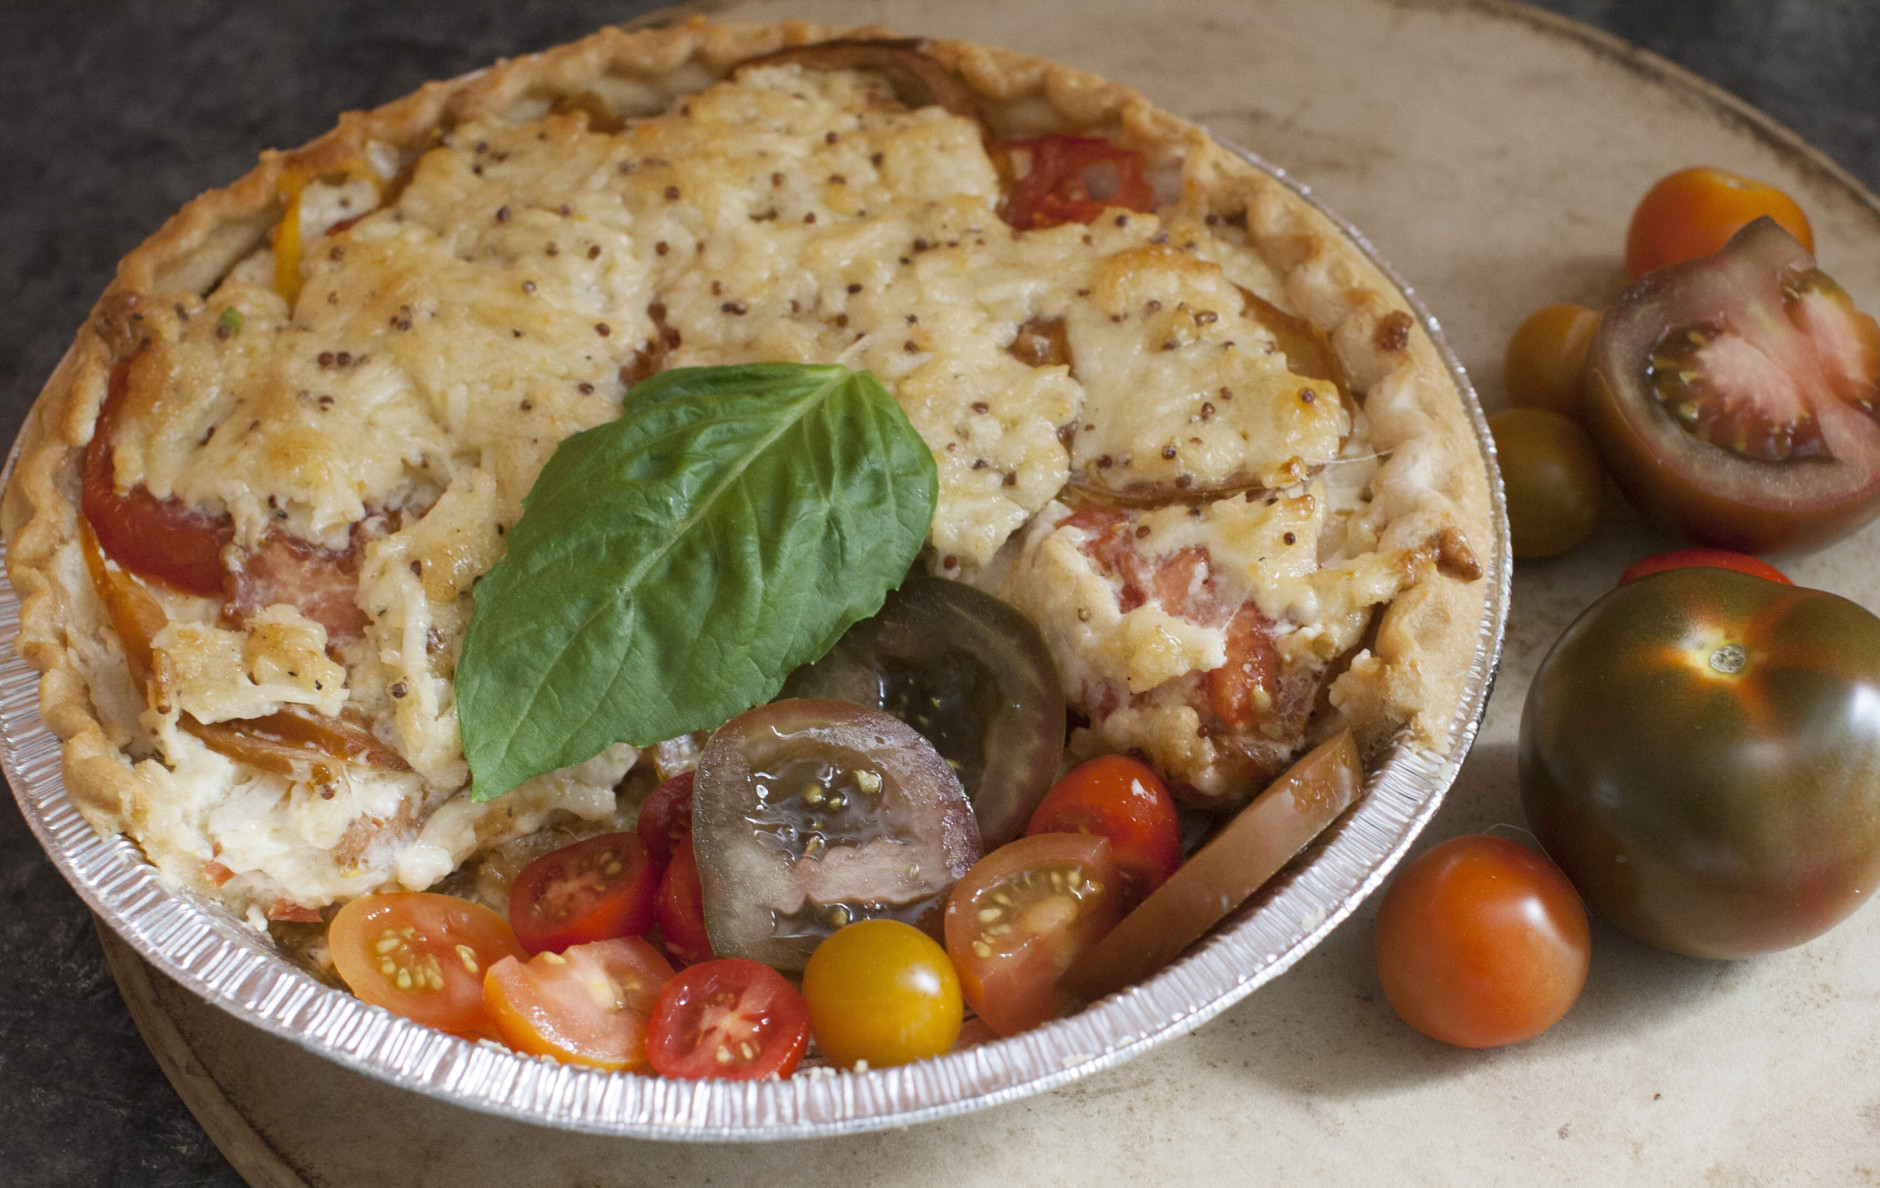 This June 9, 2014 photo shows Dijon tomato and sweet onion pie in Concord, N.H. The Tomato Pie is a classic Southern dish made in summer when the tomato plants are heavy with ripe fruit. (AP Photo/Matthew Mead)